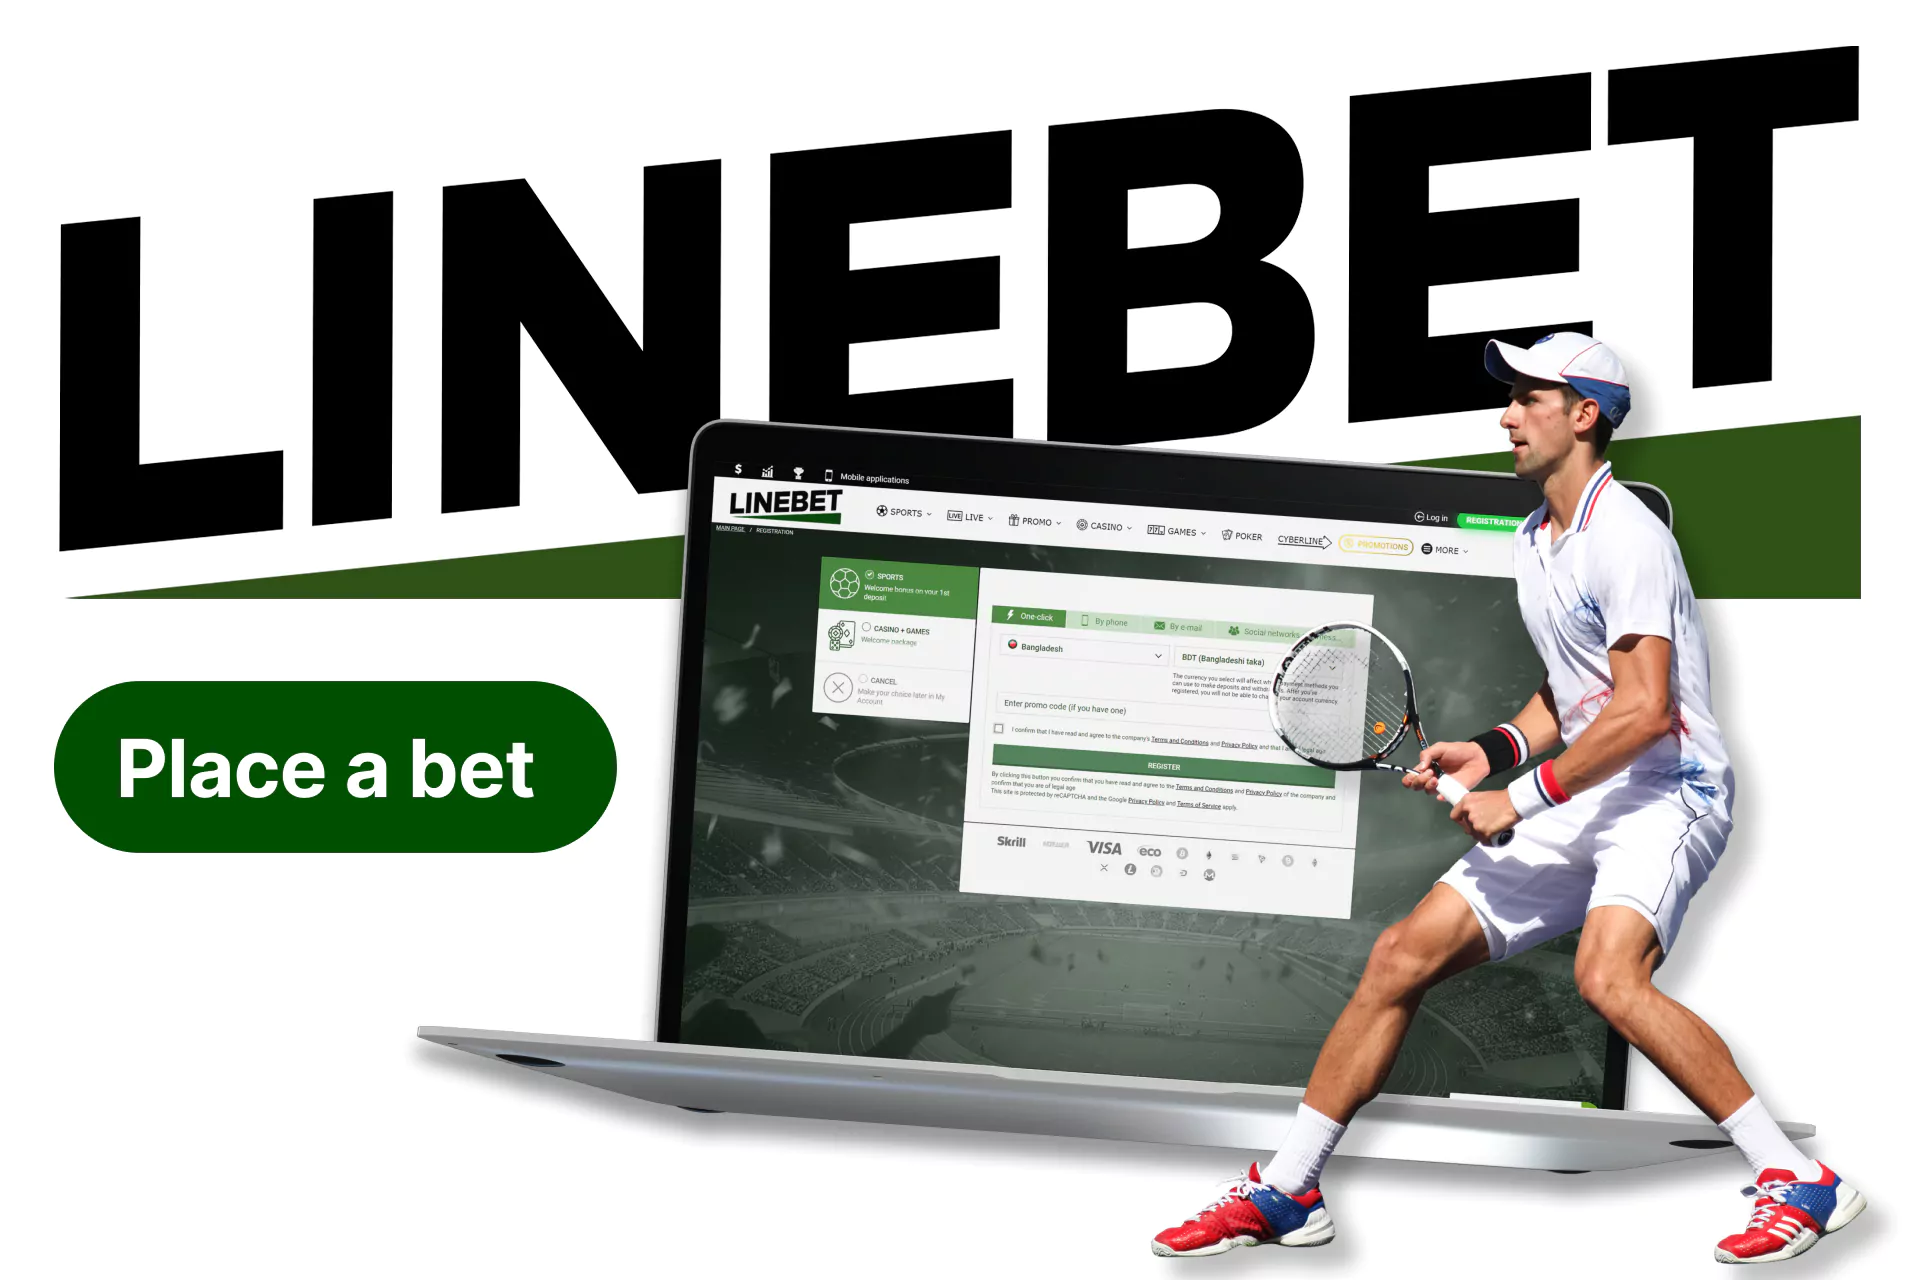 With these instructions, learn how to easily and quickly start betting at Linebet and win.